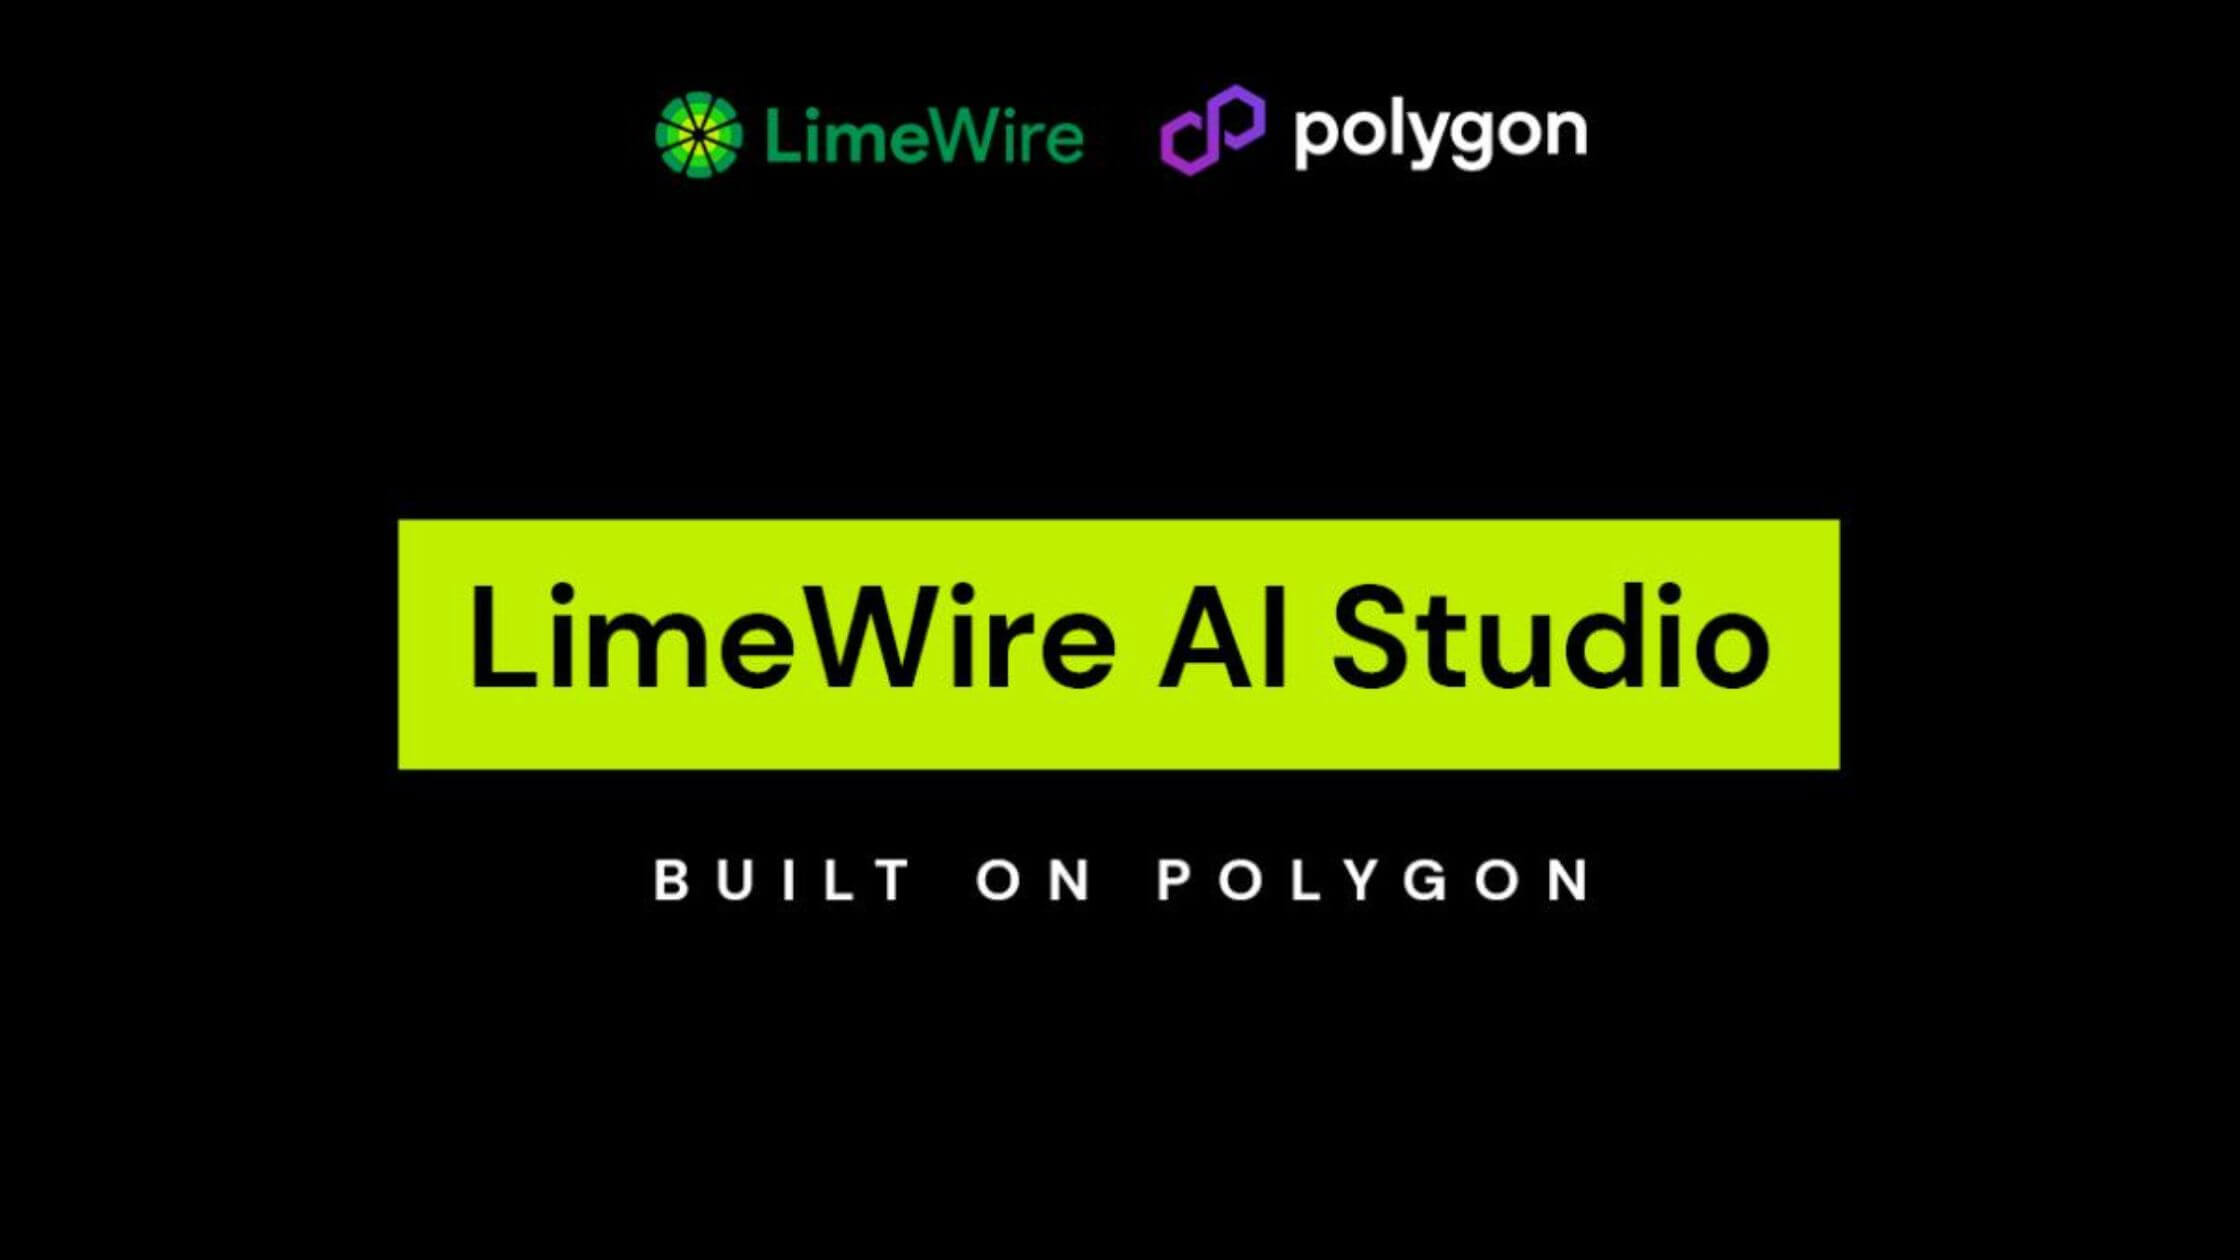 LimeWire AI ‘Creator Studio’: easily create audio, images, and video content